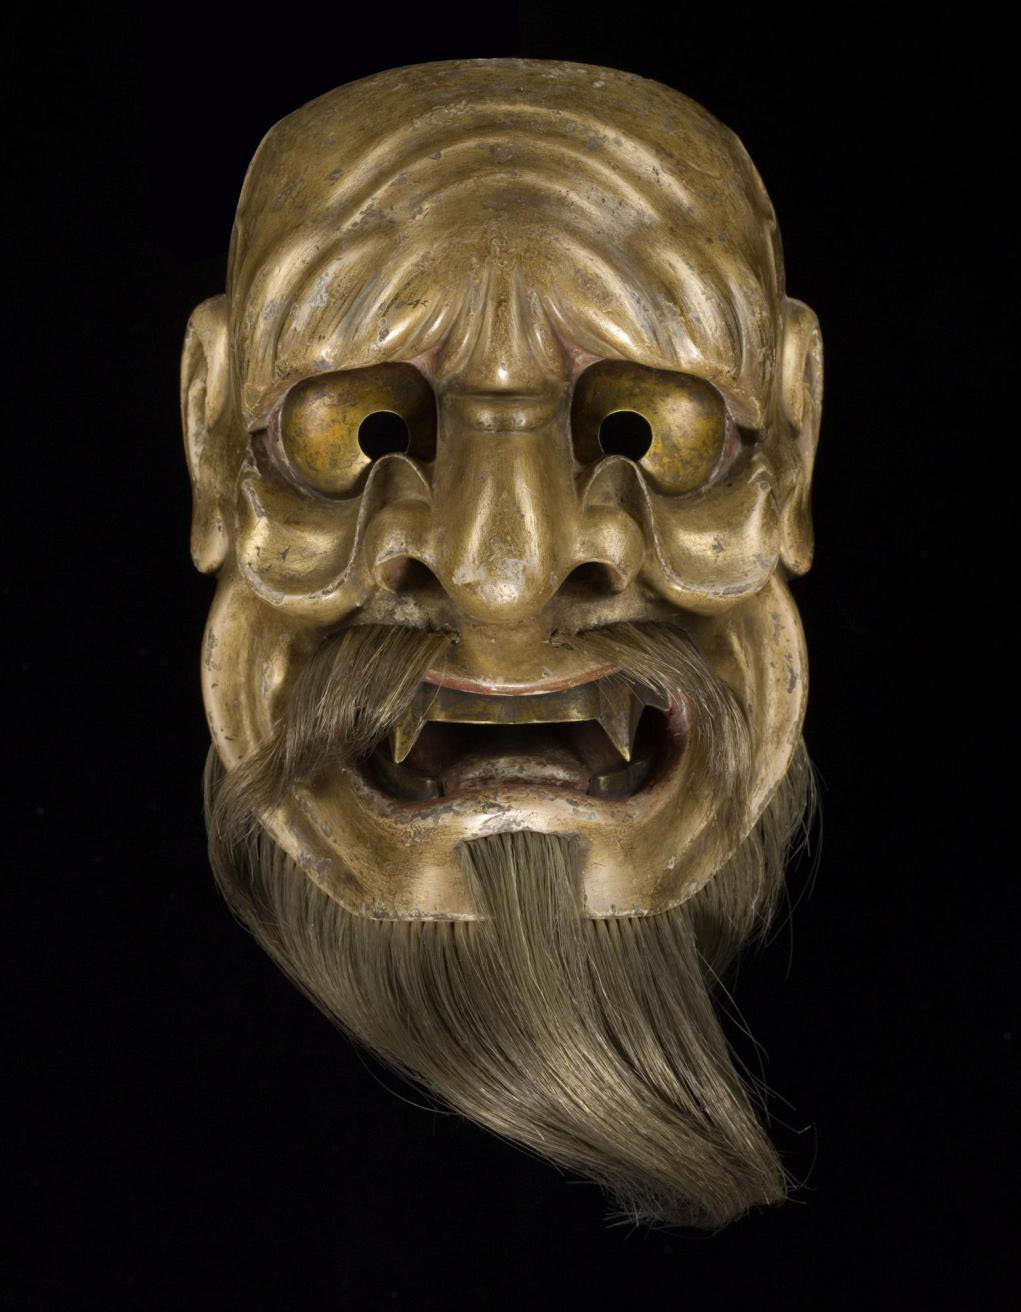 Mask representing the evil spirit Kaname-ishi, for No drama, signed: Japan, by Deme Tōhaku Mitsutaka, 1675-1715. On display in the Performance and Lives gallery, National Museum of Scotland.